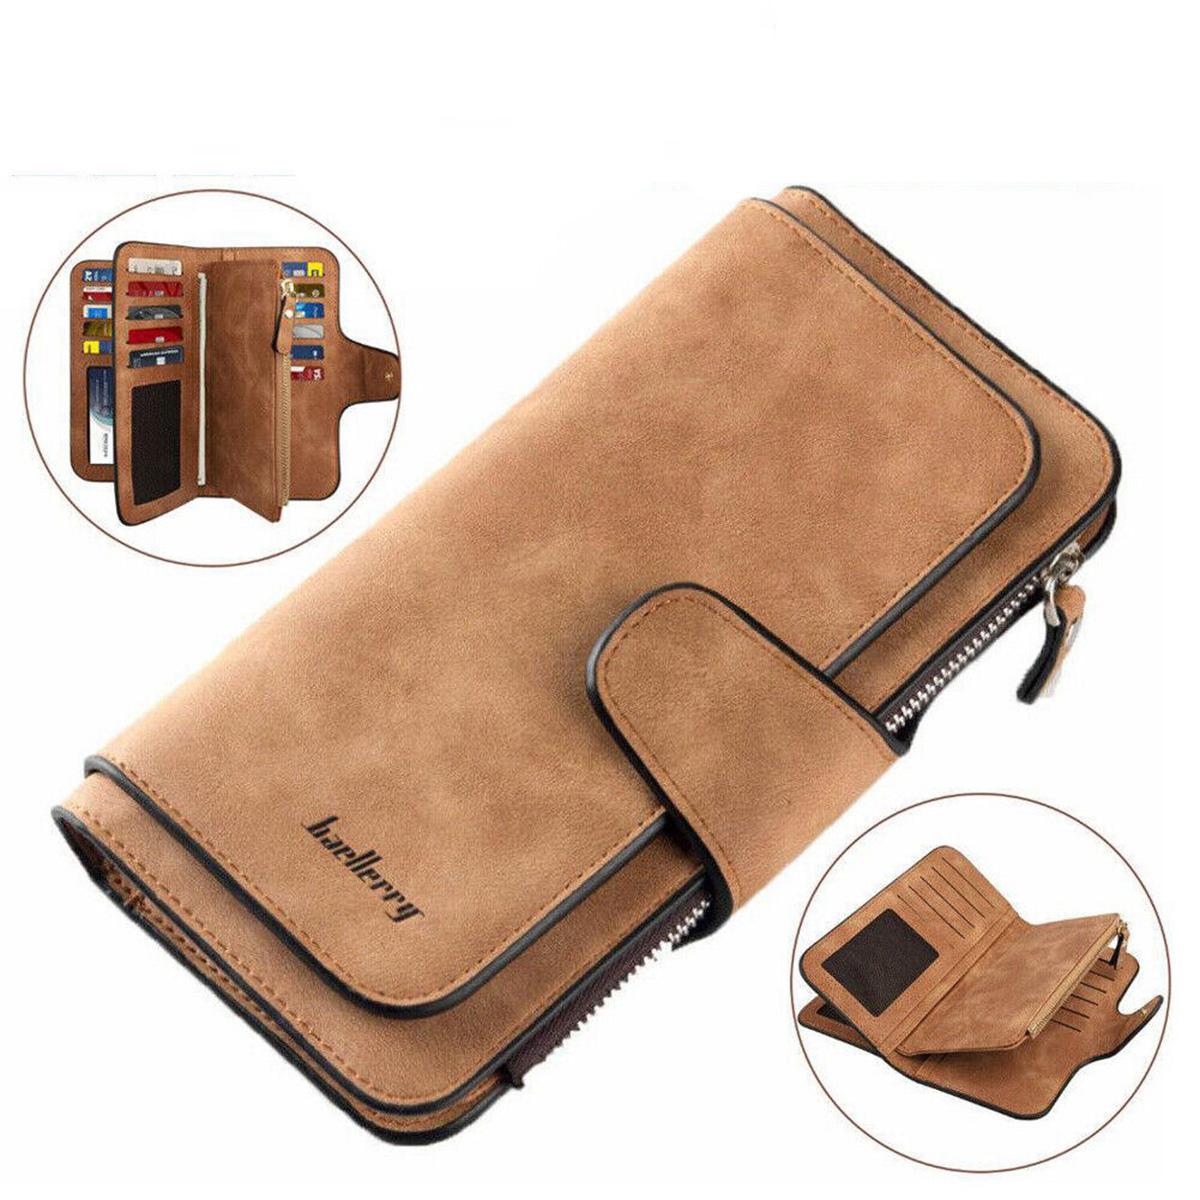 Soft Leather Wallet Long Clutch Card Card Holder Purse For Women